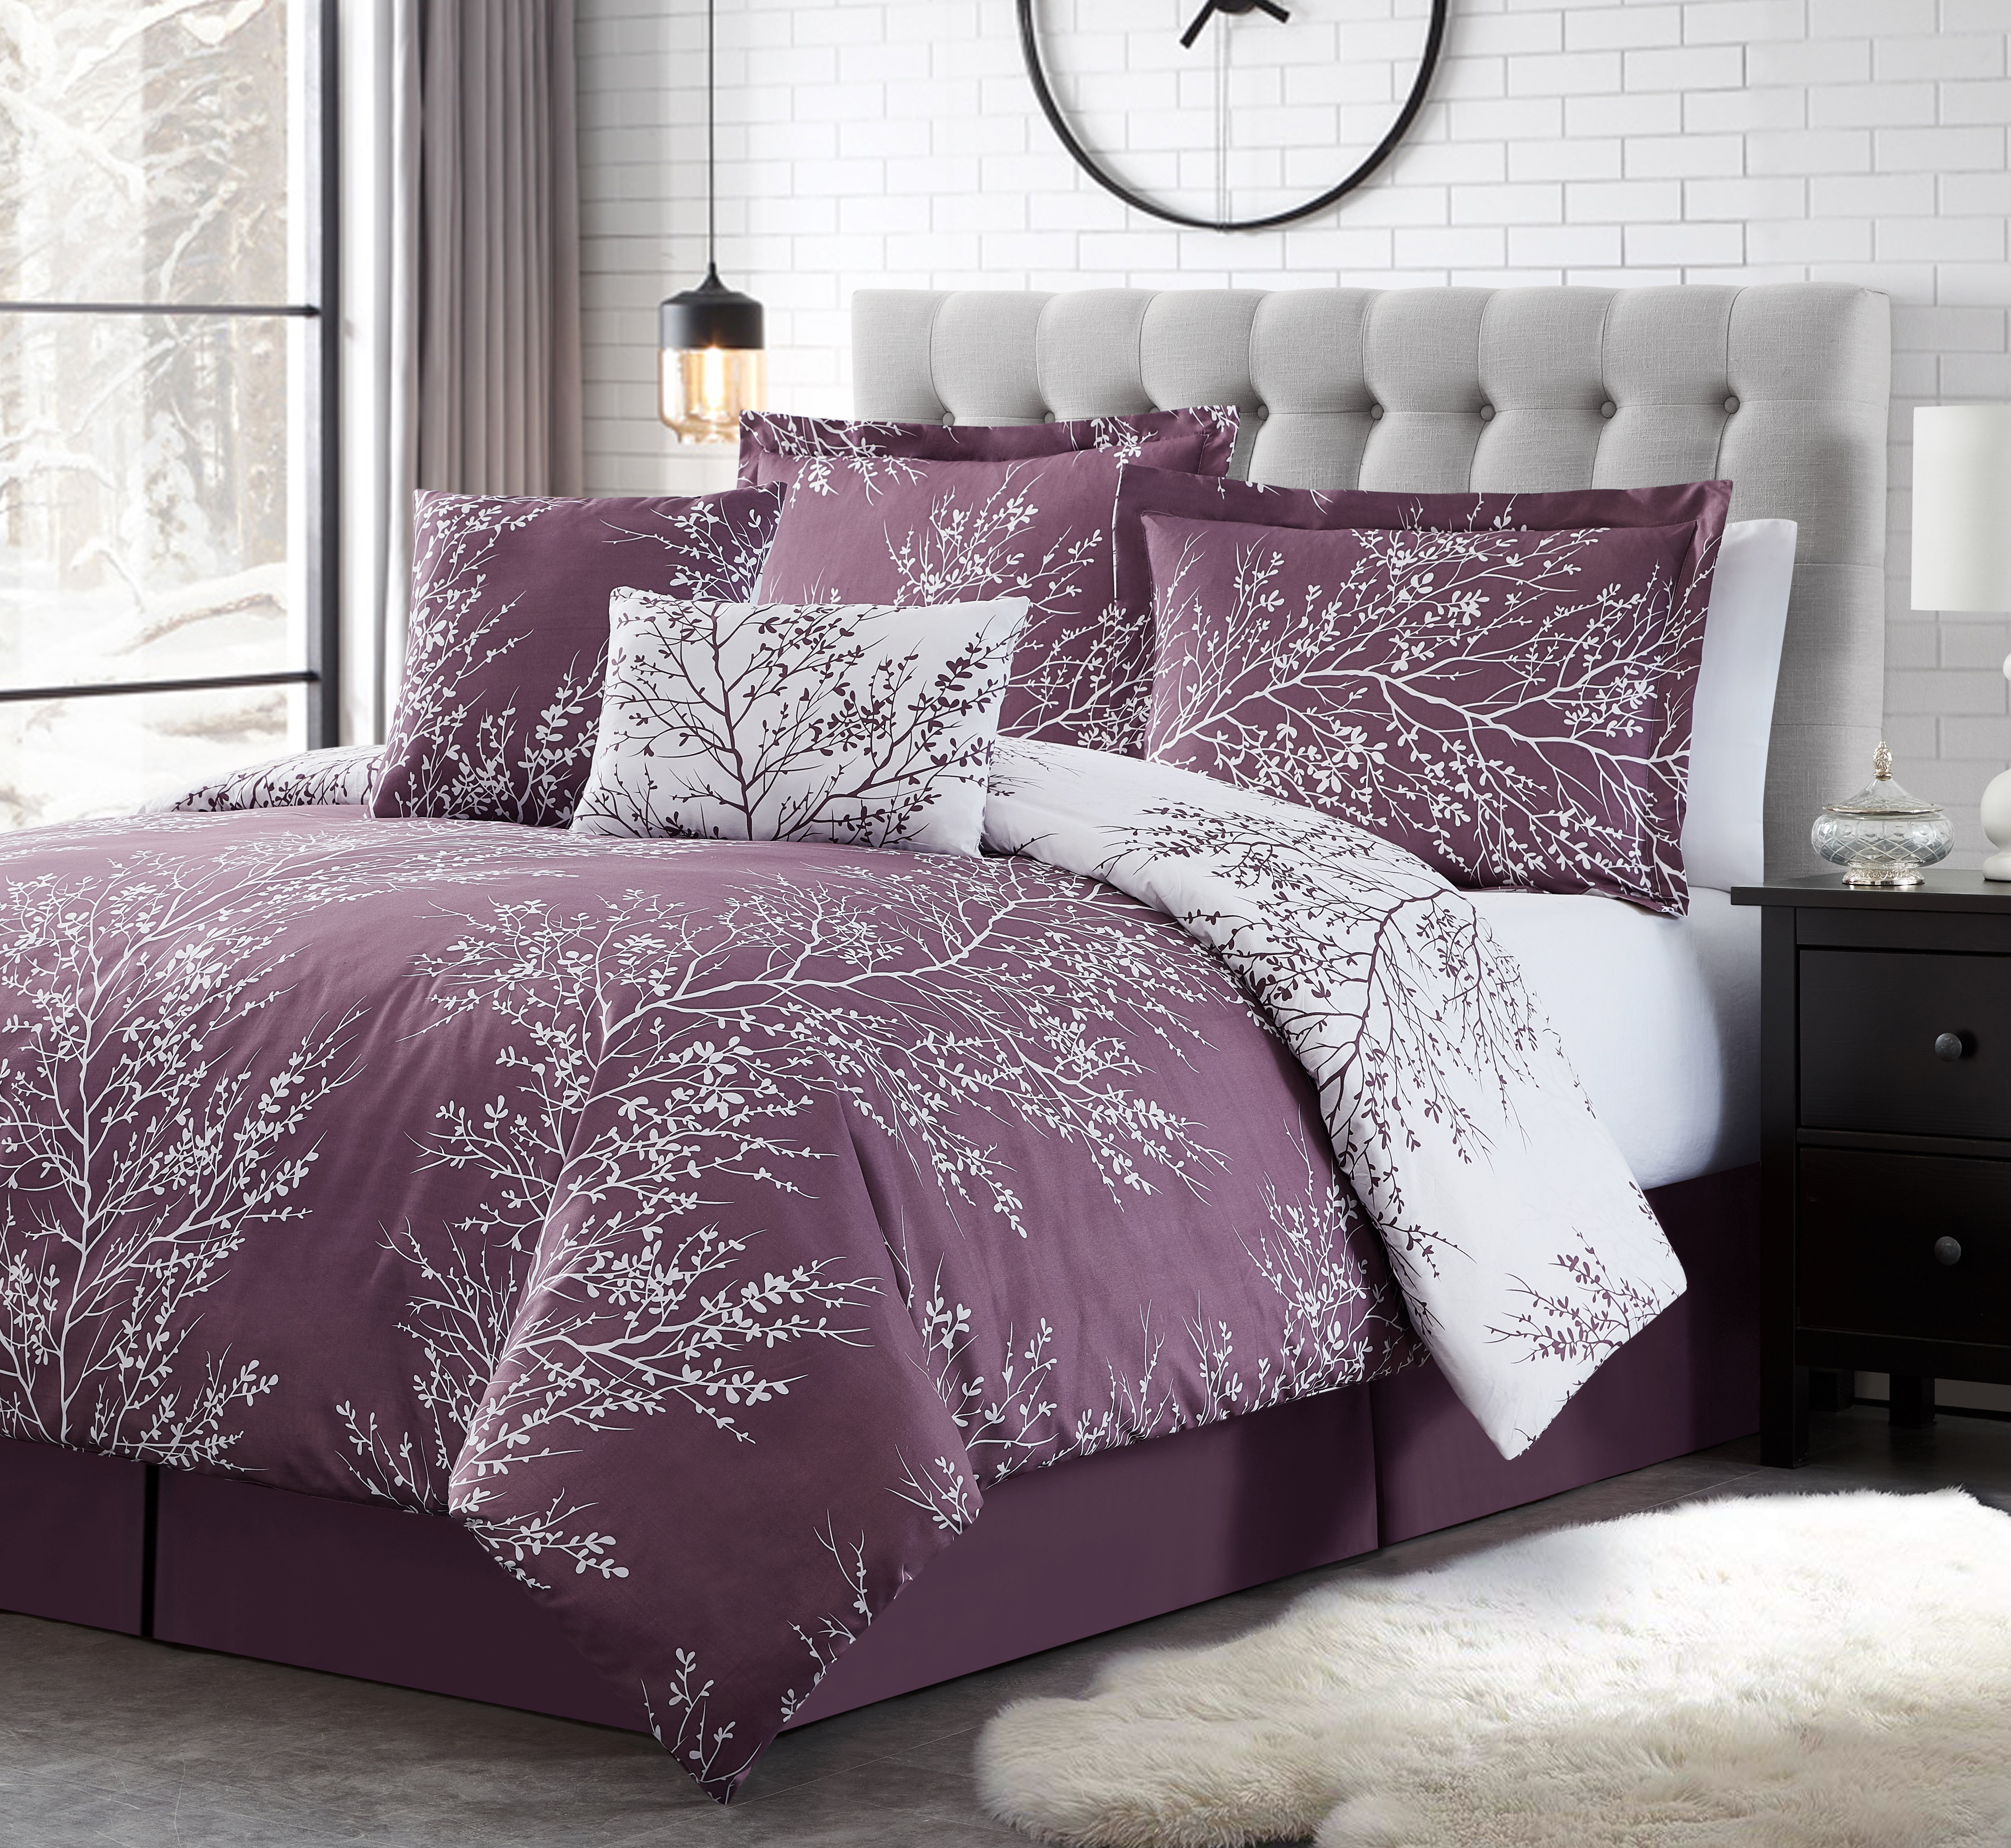 Nature & Floral Purple Bedding You'll Love